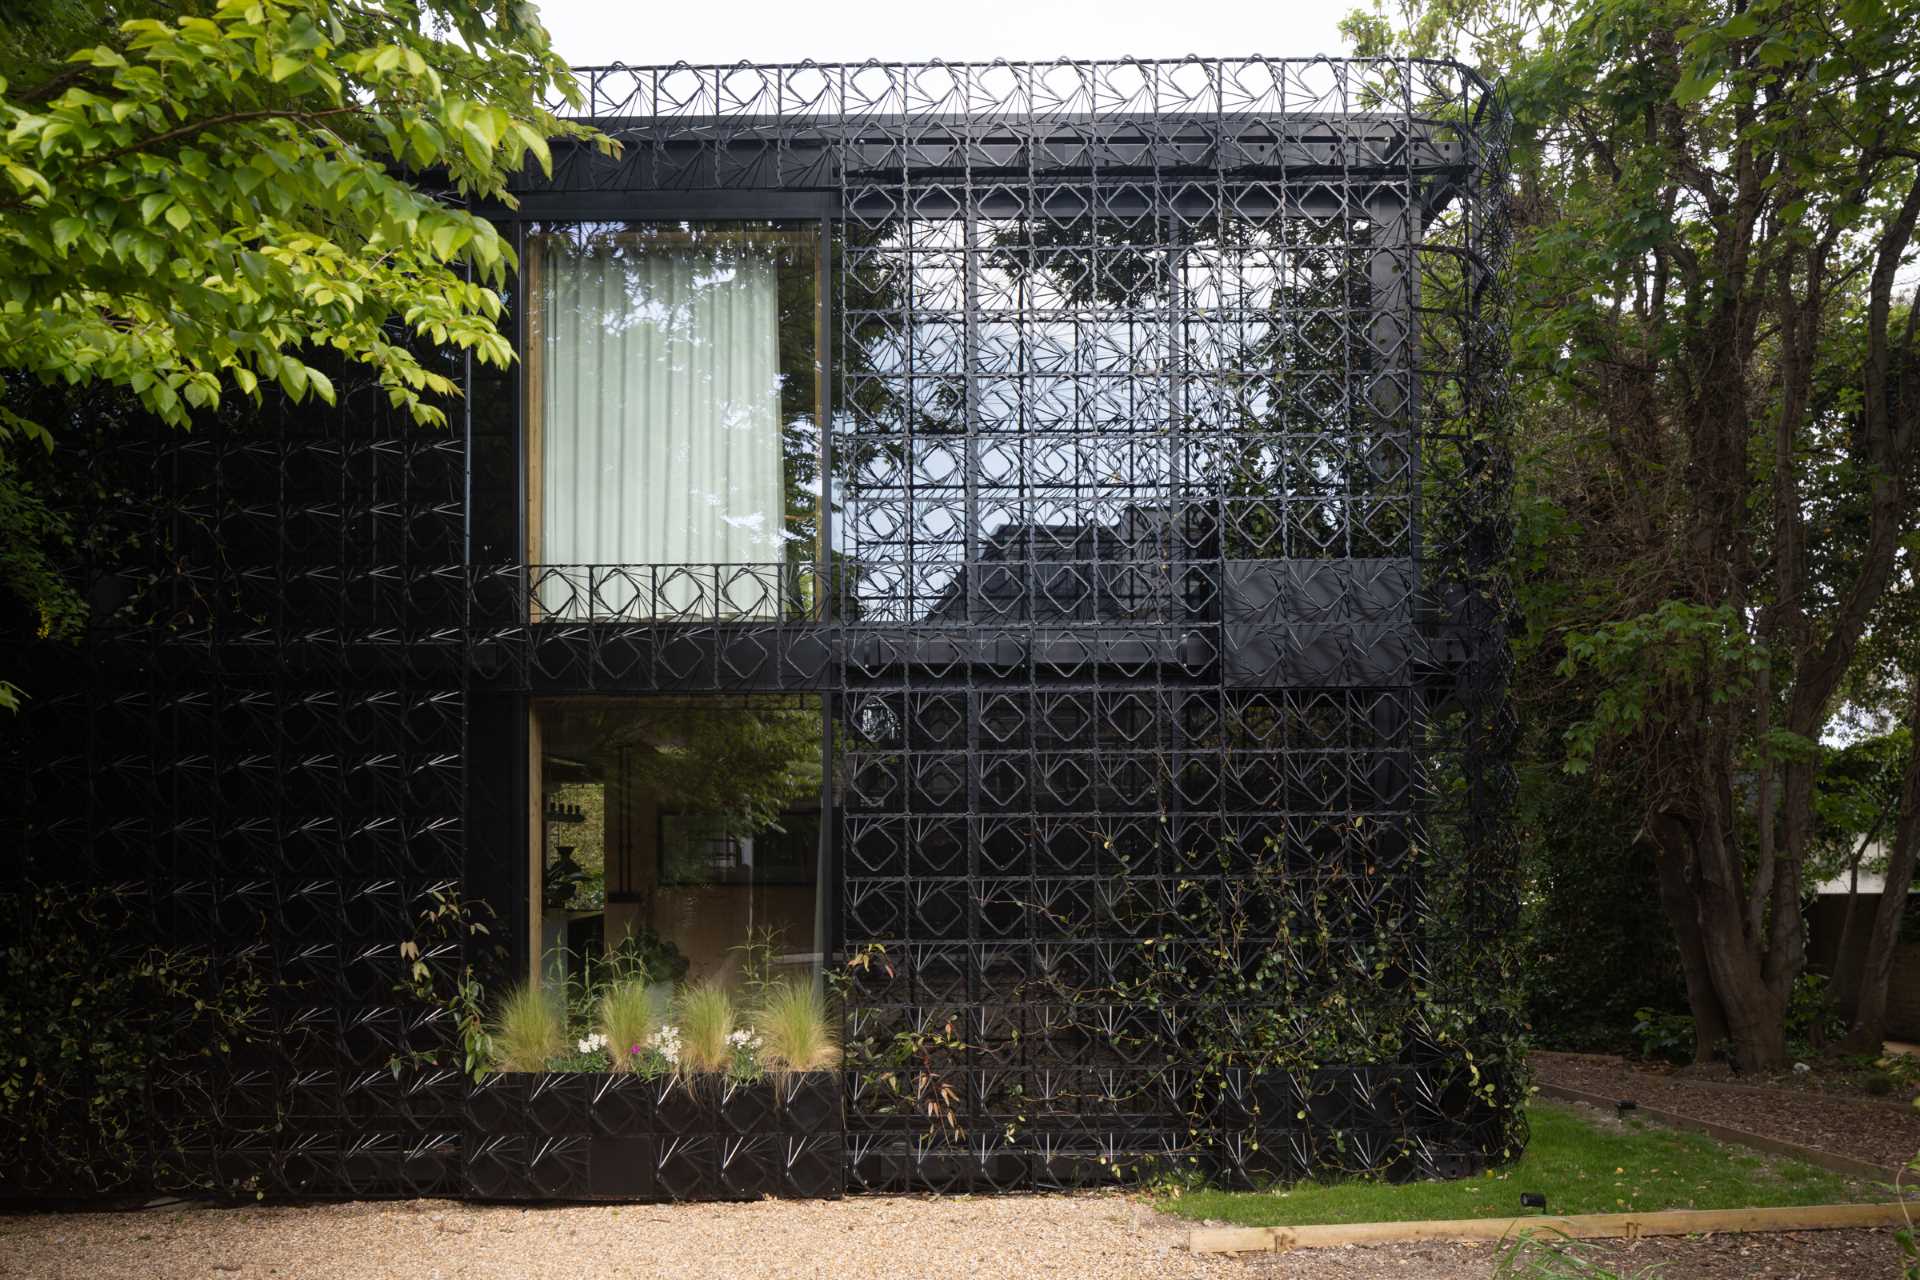 A modern black house with a sculptural facade designed to let plants grow on the exterior over time.